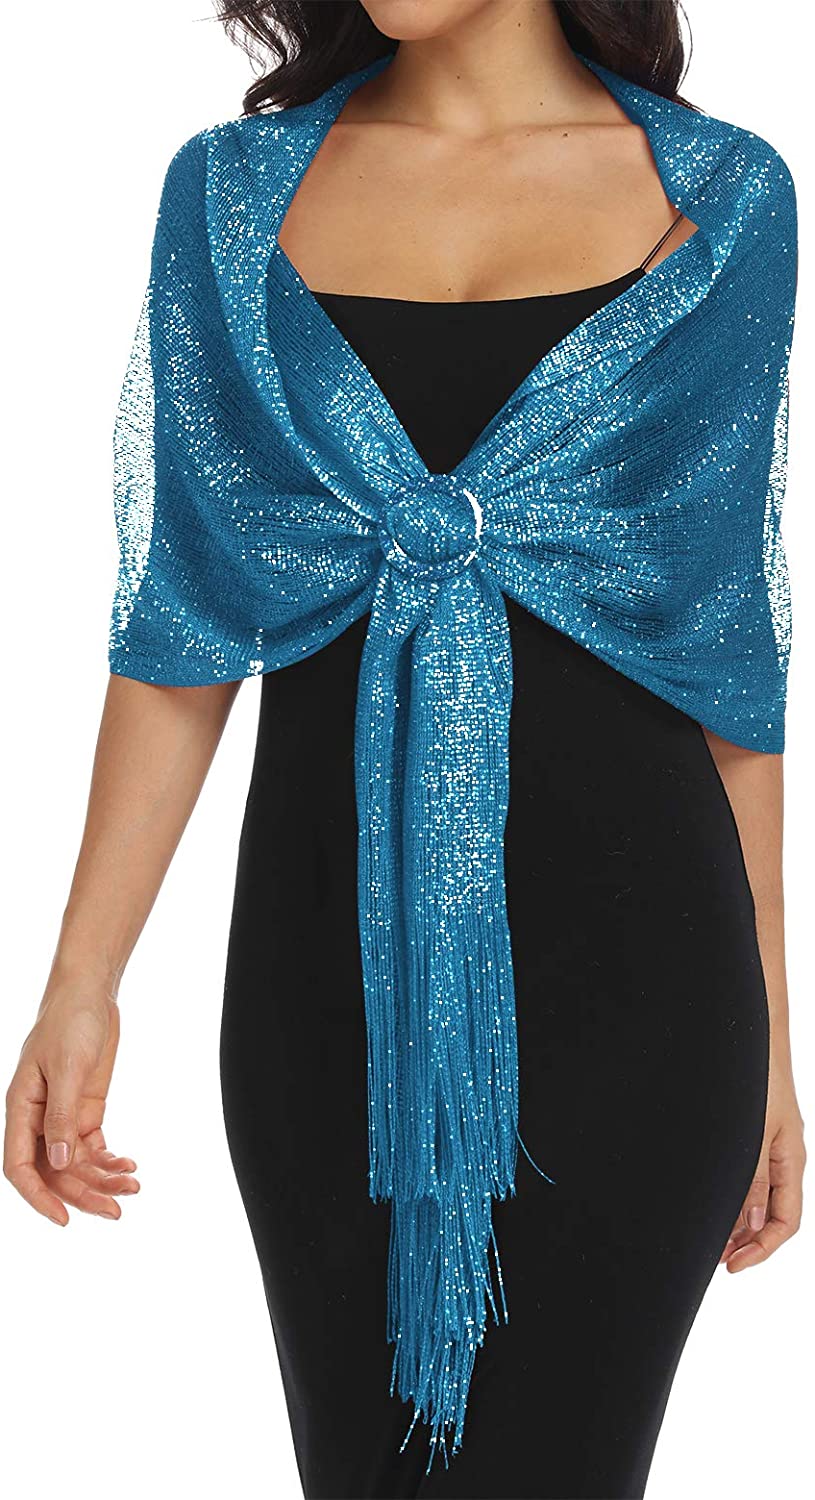 Sparkling Metallic Shawls and Wraps for Evening Party Dresses Ladiery ...